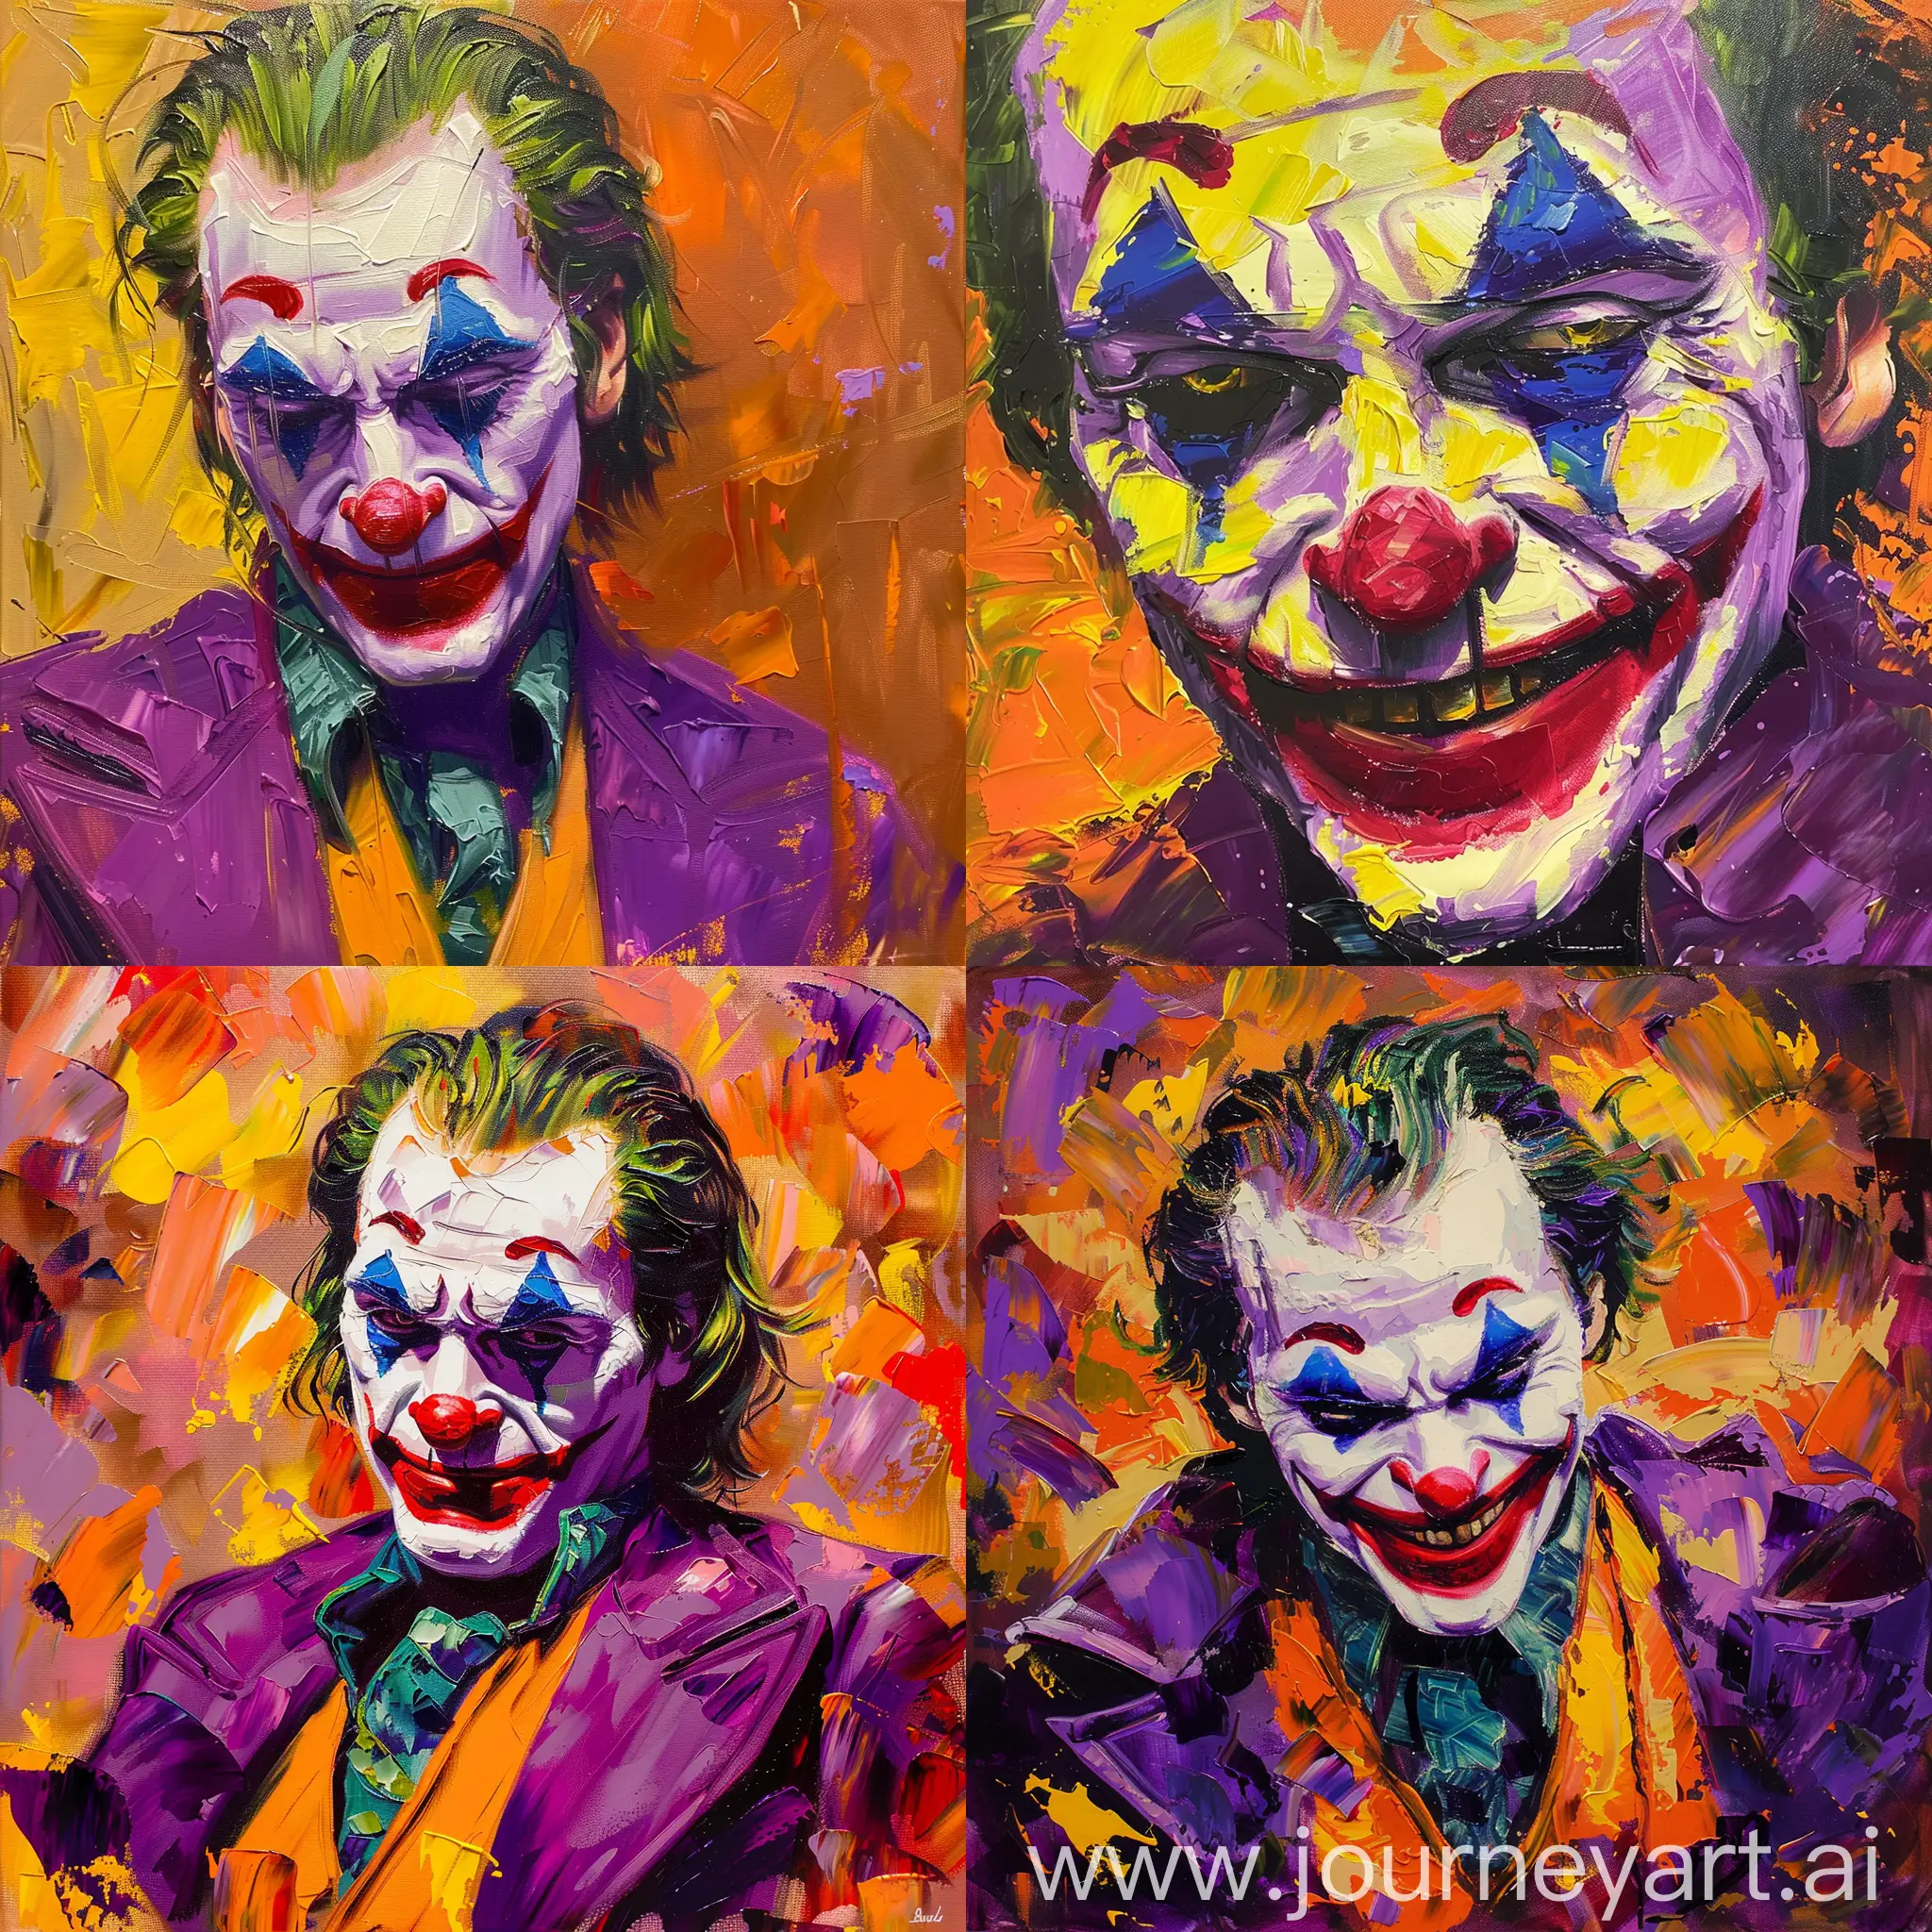 Colorful-Joker-in-Star-Wars-Inspired-Oil-Painting